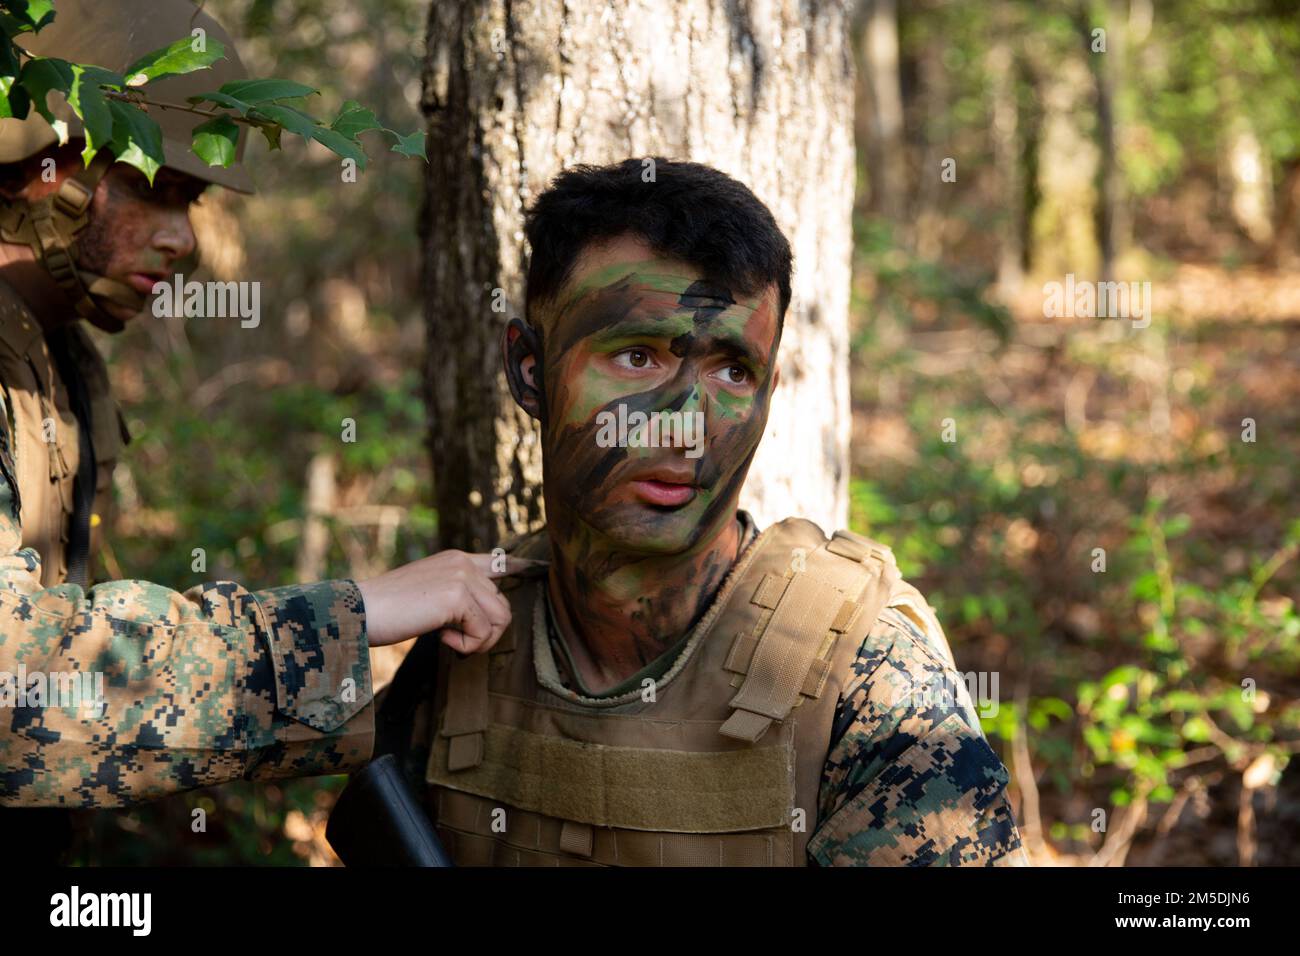 U.S. Marine Corps Pfc. Noah Reynard receiving camouflage paint from U.S. Marine Corps Pfc. Kylie Webb, combat engineer students with Marine Corps Engineer School, during the third phase evaluation on Marine Corps Camp Lejeune, North Carolina, March 4, 2022. Combat engineers conduct a variety of tasks, including building structures, engineer reconnaissance, emplacing obstacle systems and conducting breaching operations as part of the 21st century basic combat engineer course. Stock Photo